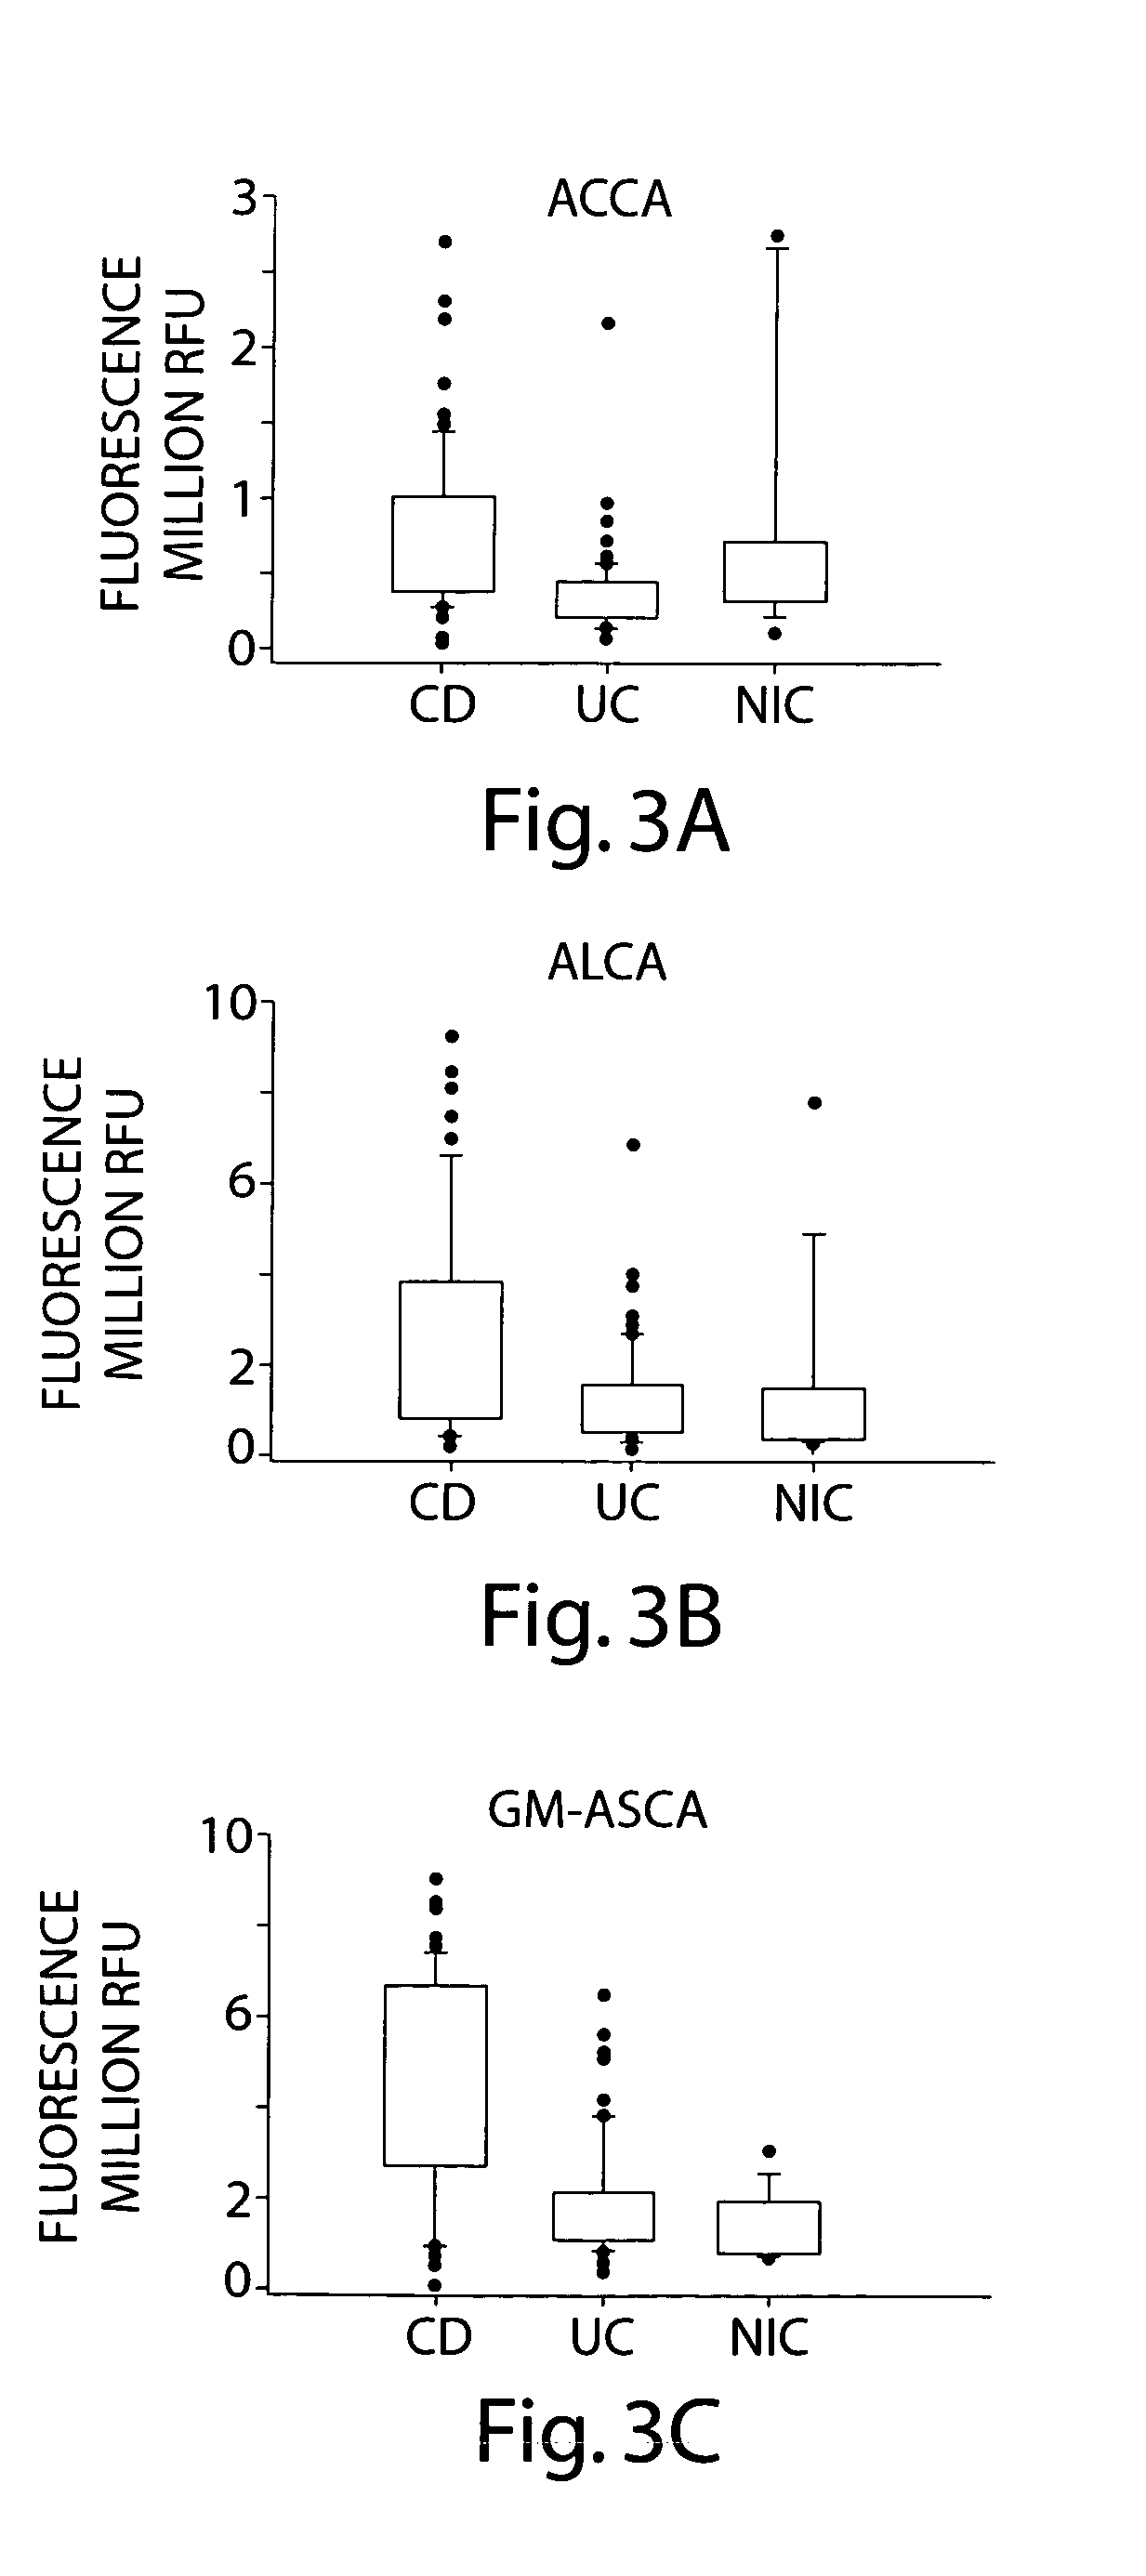 Method for diagnosing diseases based on levels of anti-glycan antibodies